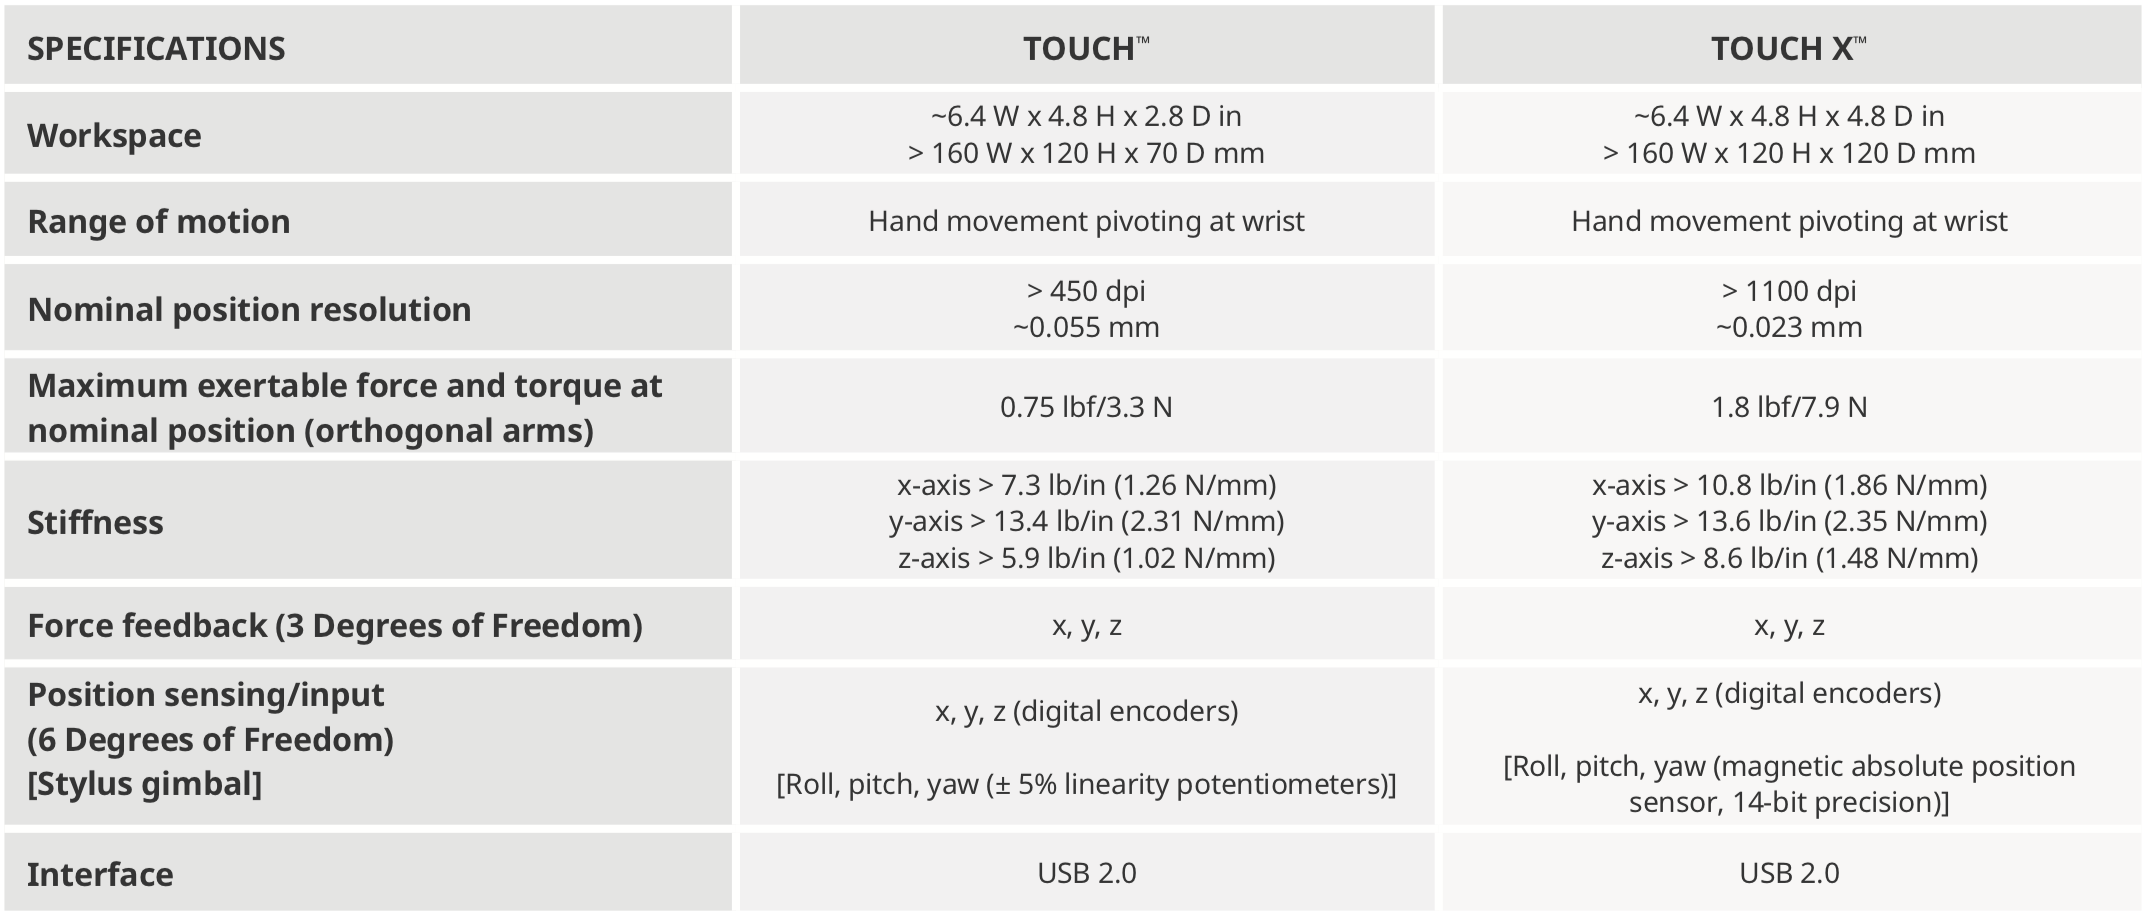 3D Systems Touch Specifications